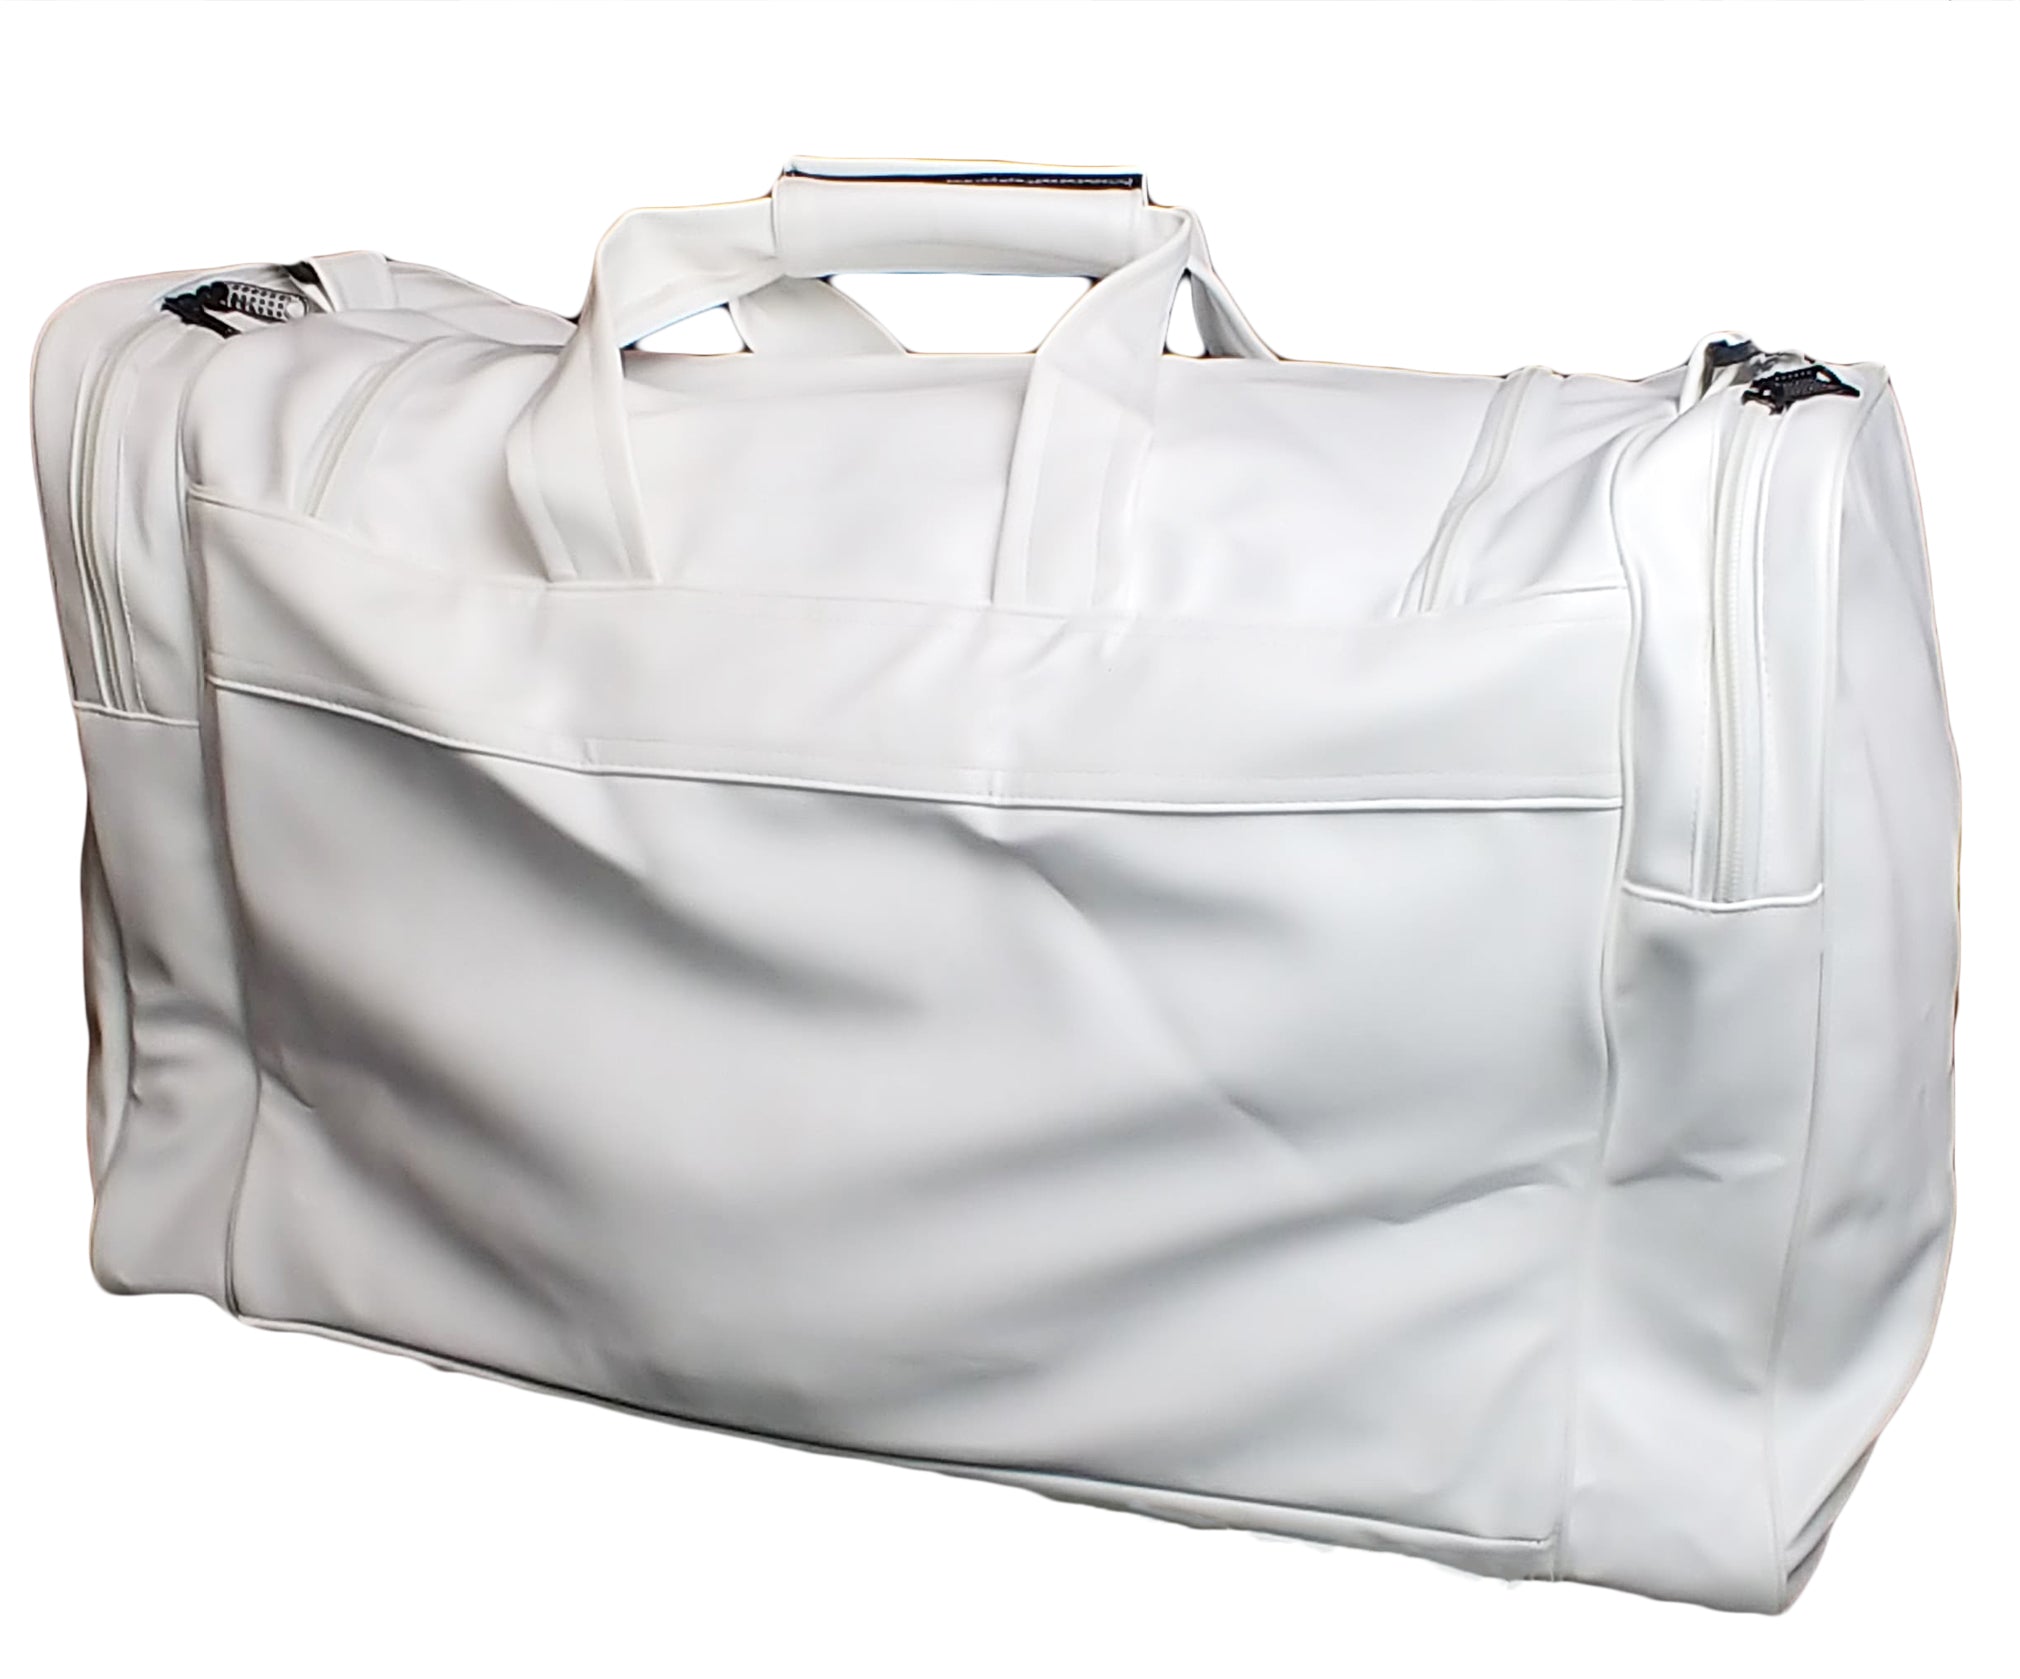 Mperial Leather Embroidered Duffle Bag (white)